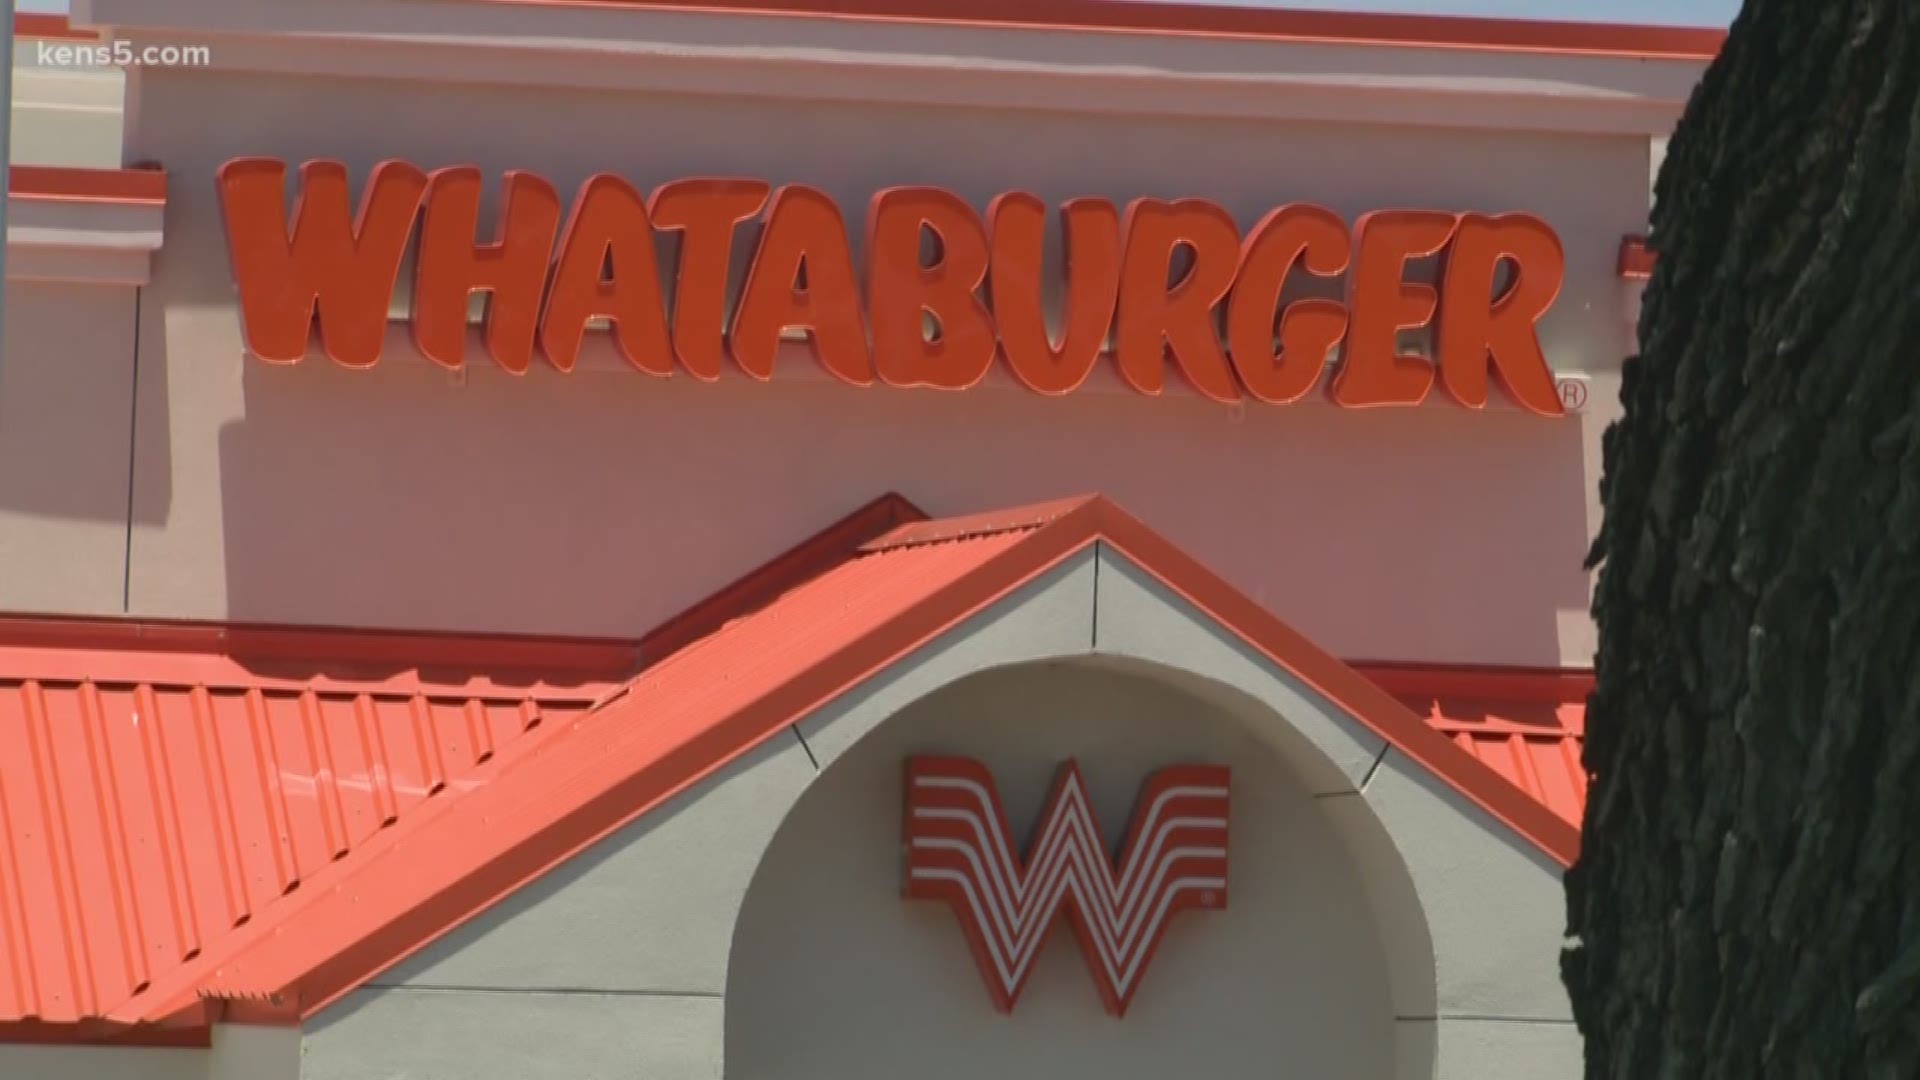 San Antonio's Whataburger has a new owner. For the first time in nearly 70 years, the Dobson family now shares the company with a business partner that controls a majority stake in Whataburger.